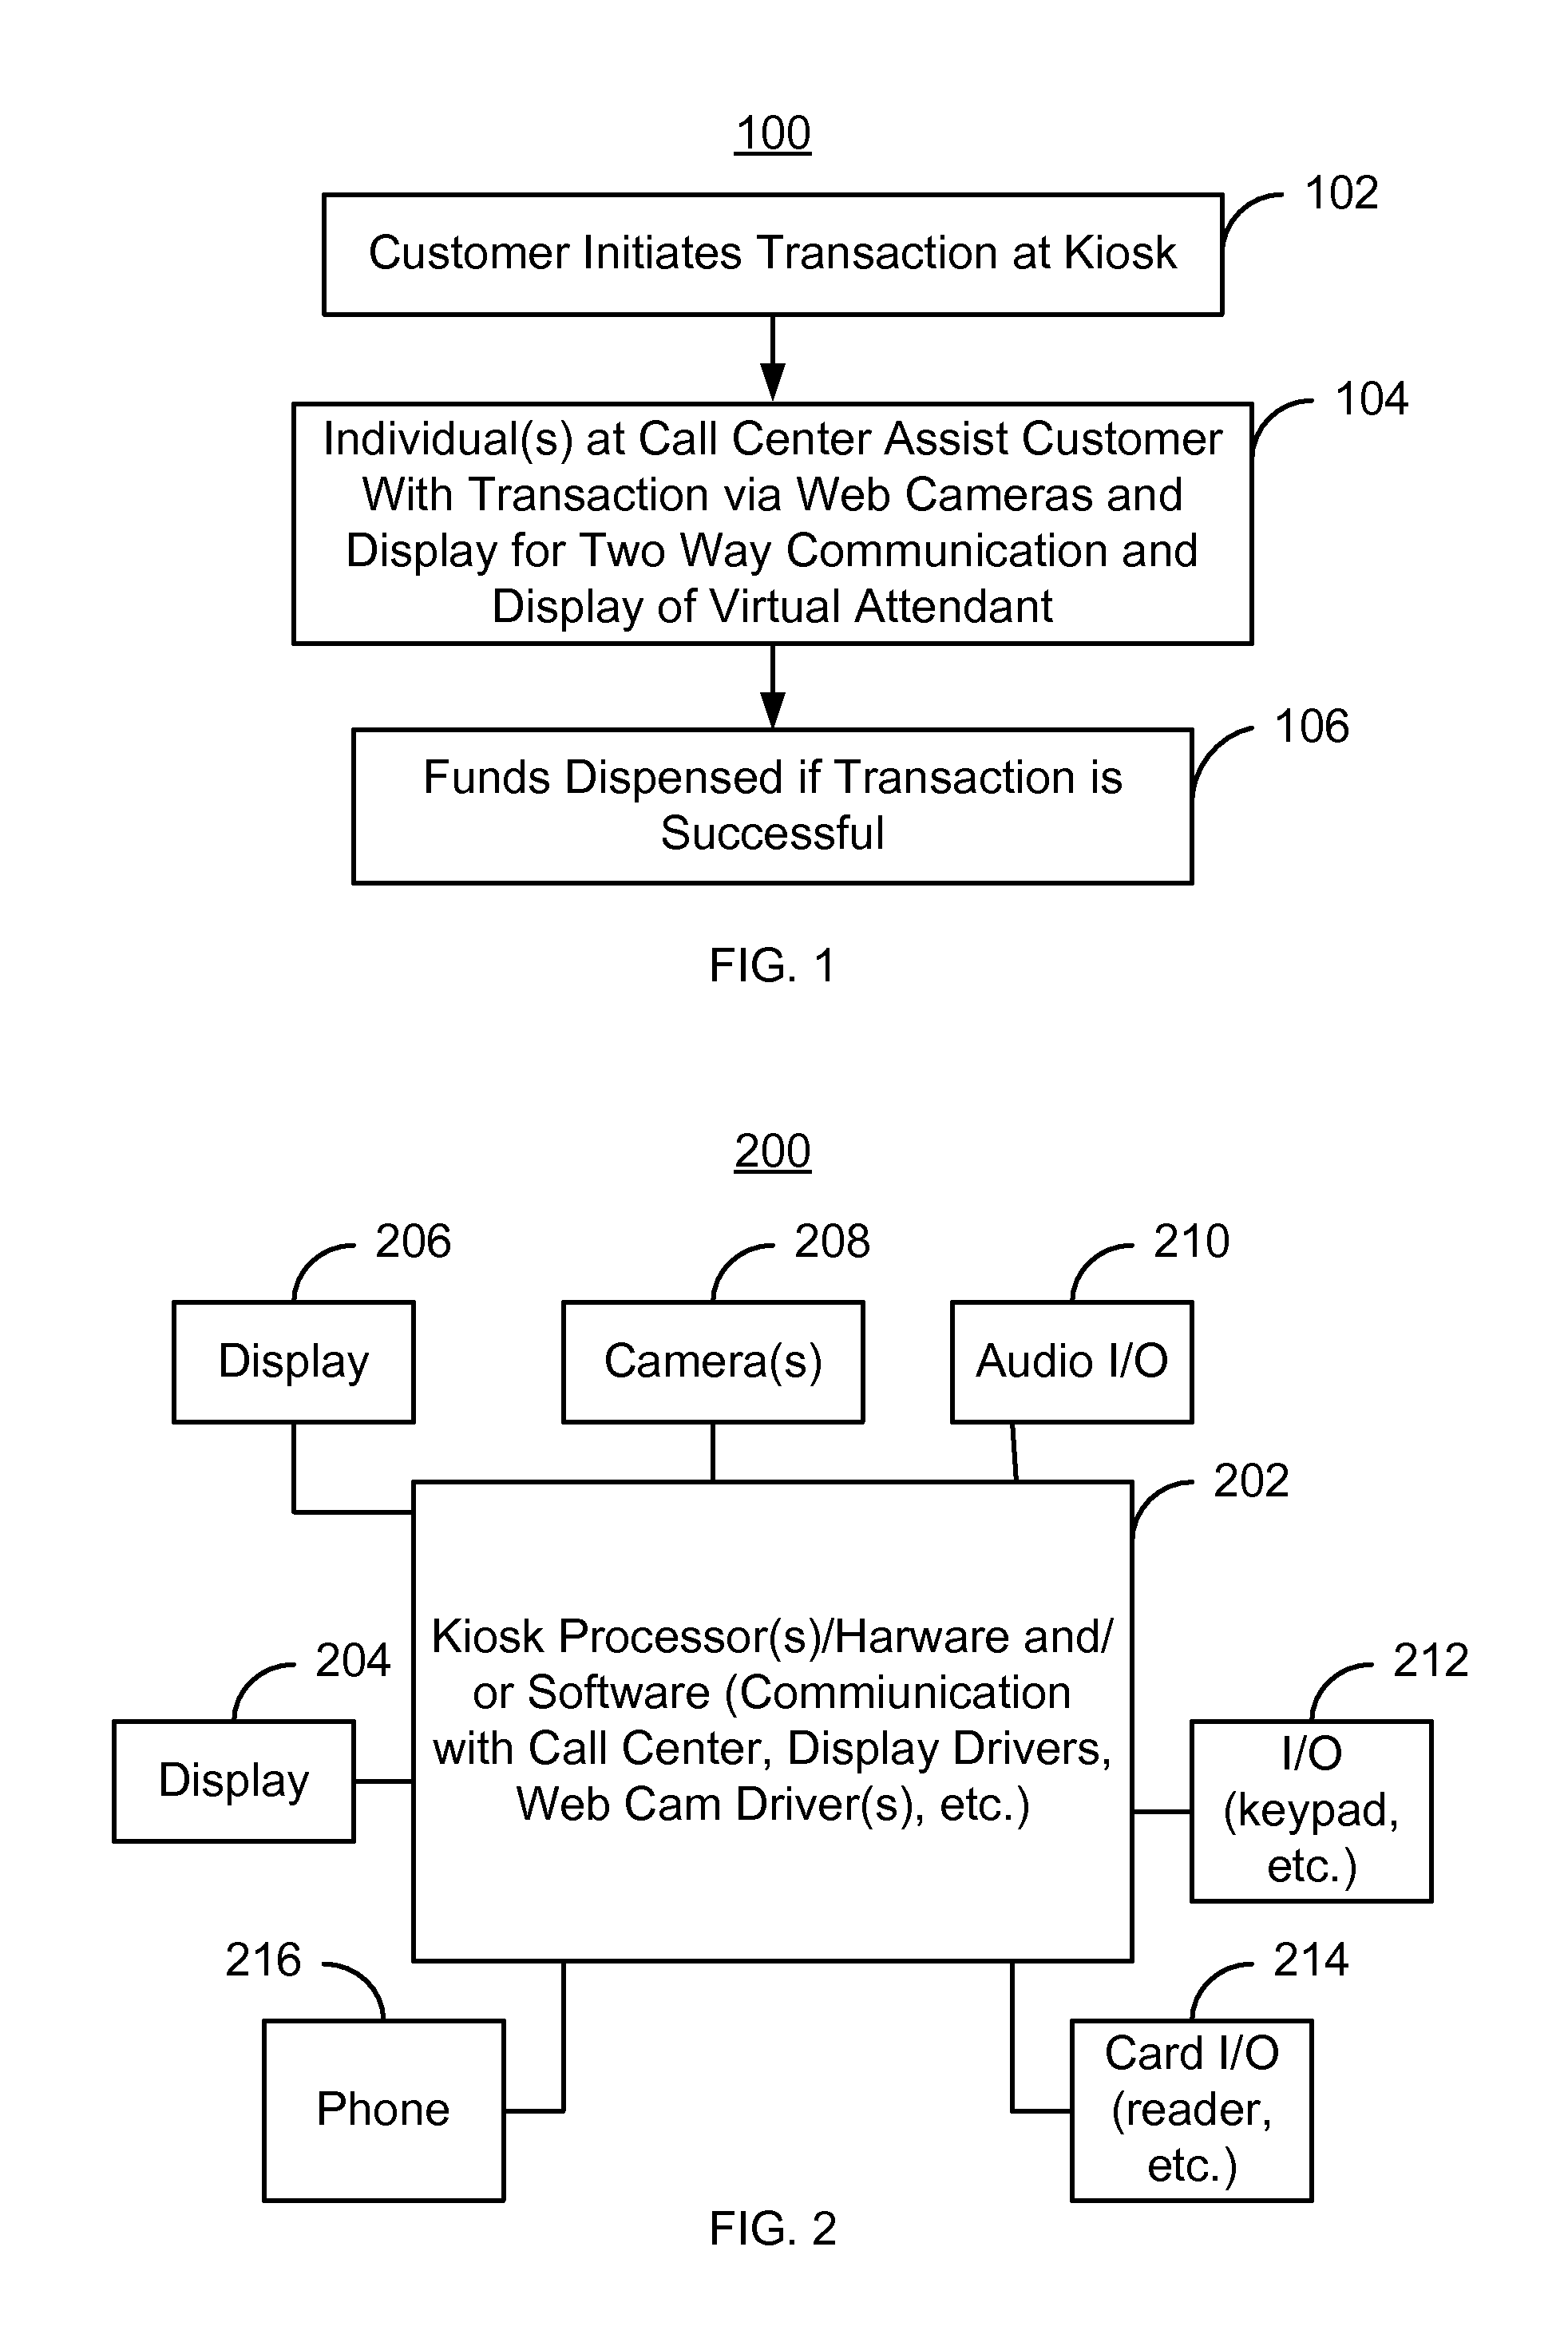 Method and system for providing remote financial services